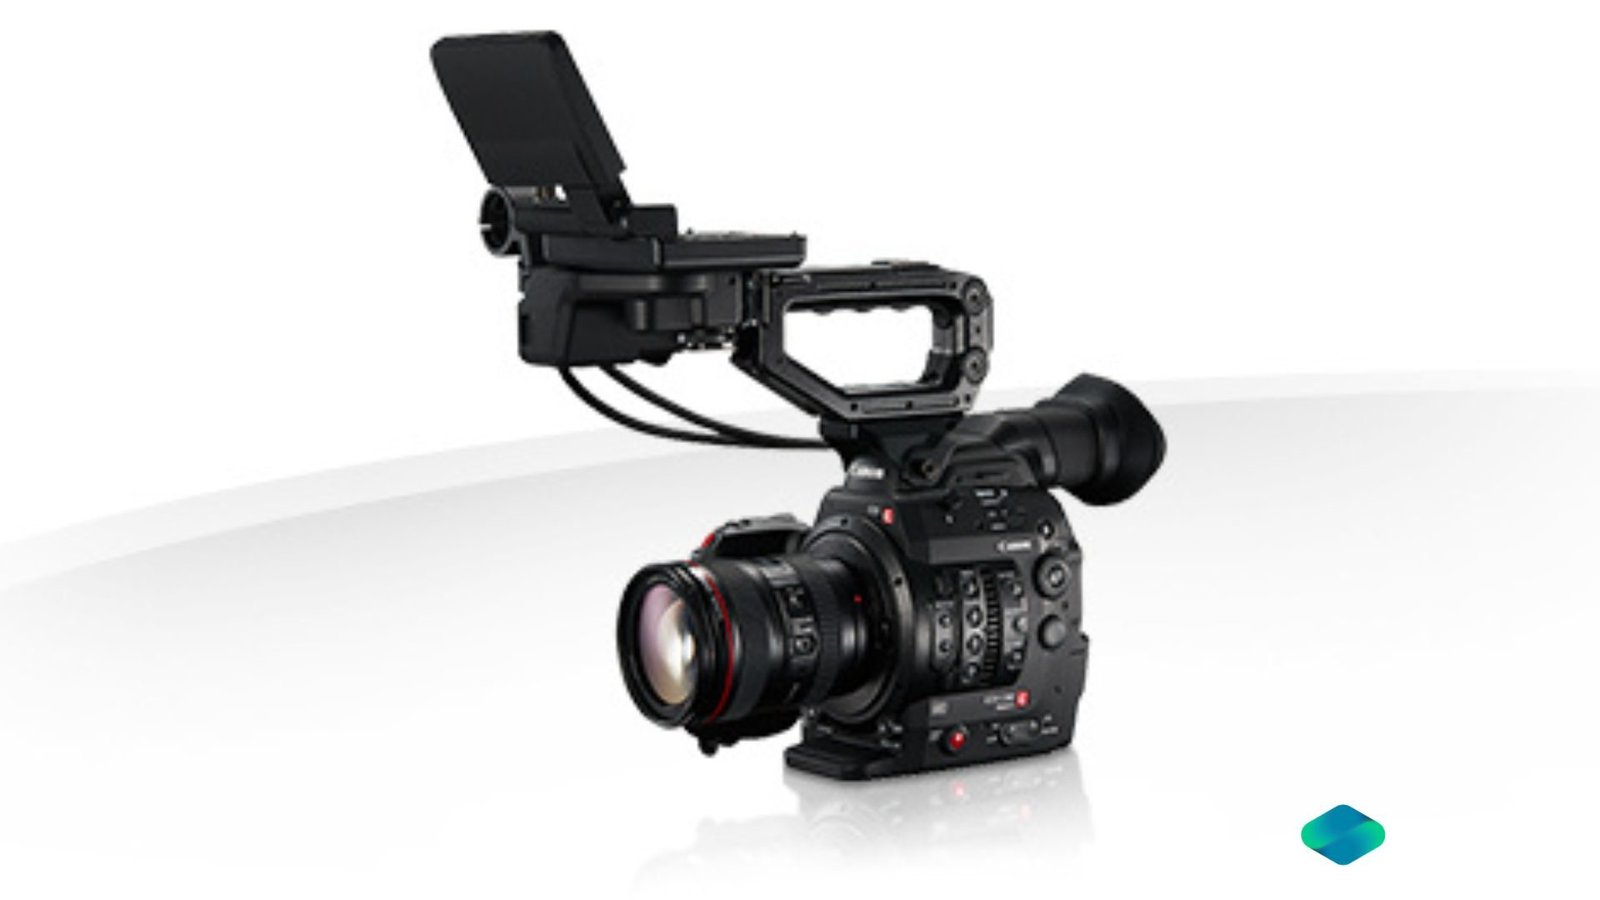 Rent Canon C-300 Mark II Camera With Cp.3 Lens Kit in Delhi NCR, Camera accessories, Camera lenses for rent, in Delhi Gurgaon Noida, hire Shooting equipment, Lighting equipment rental, Film gear rental for Video production, camera rental company in Delhi, film equipment rental company